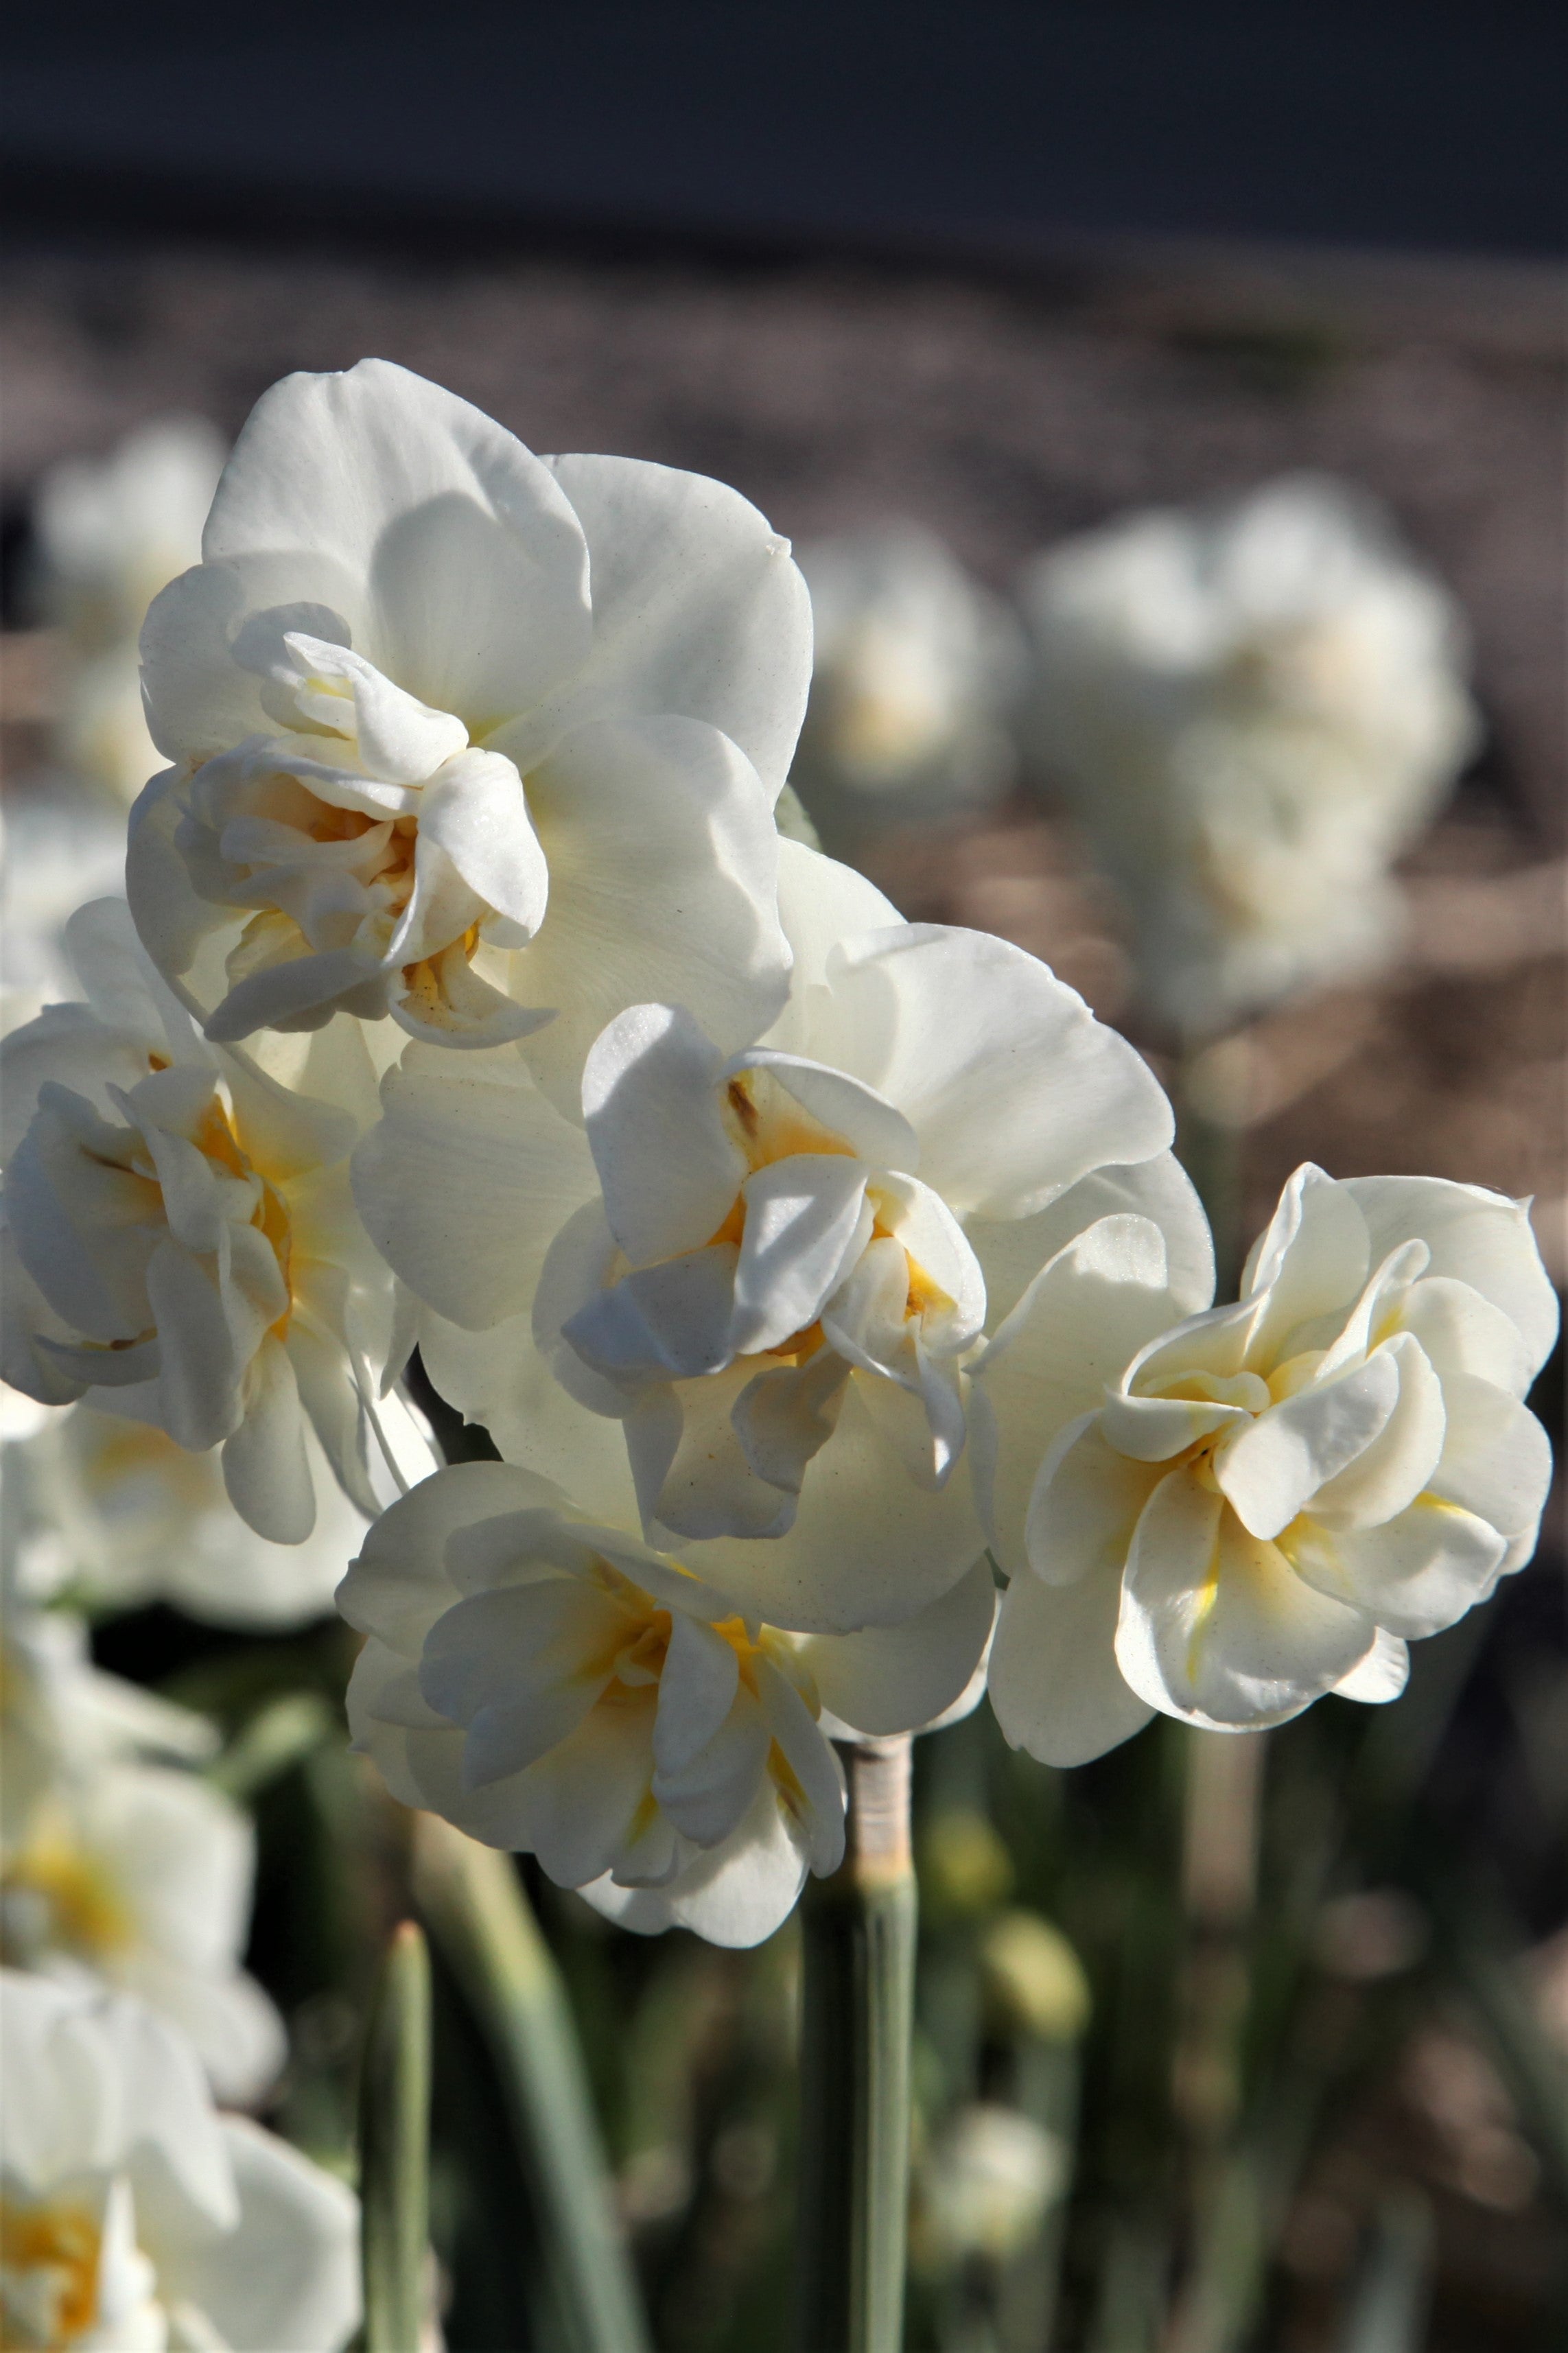 Delightful daffodils spreading smiles with their cheerful white blossoms